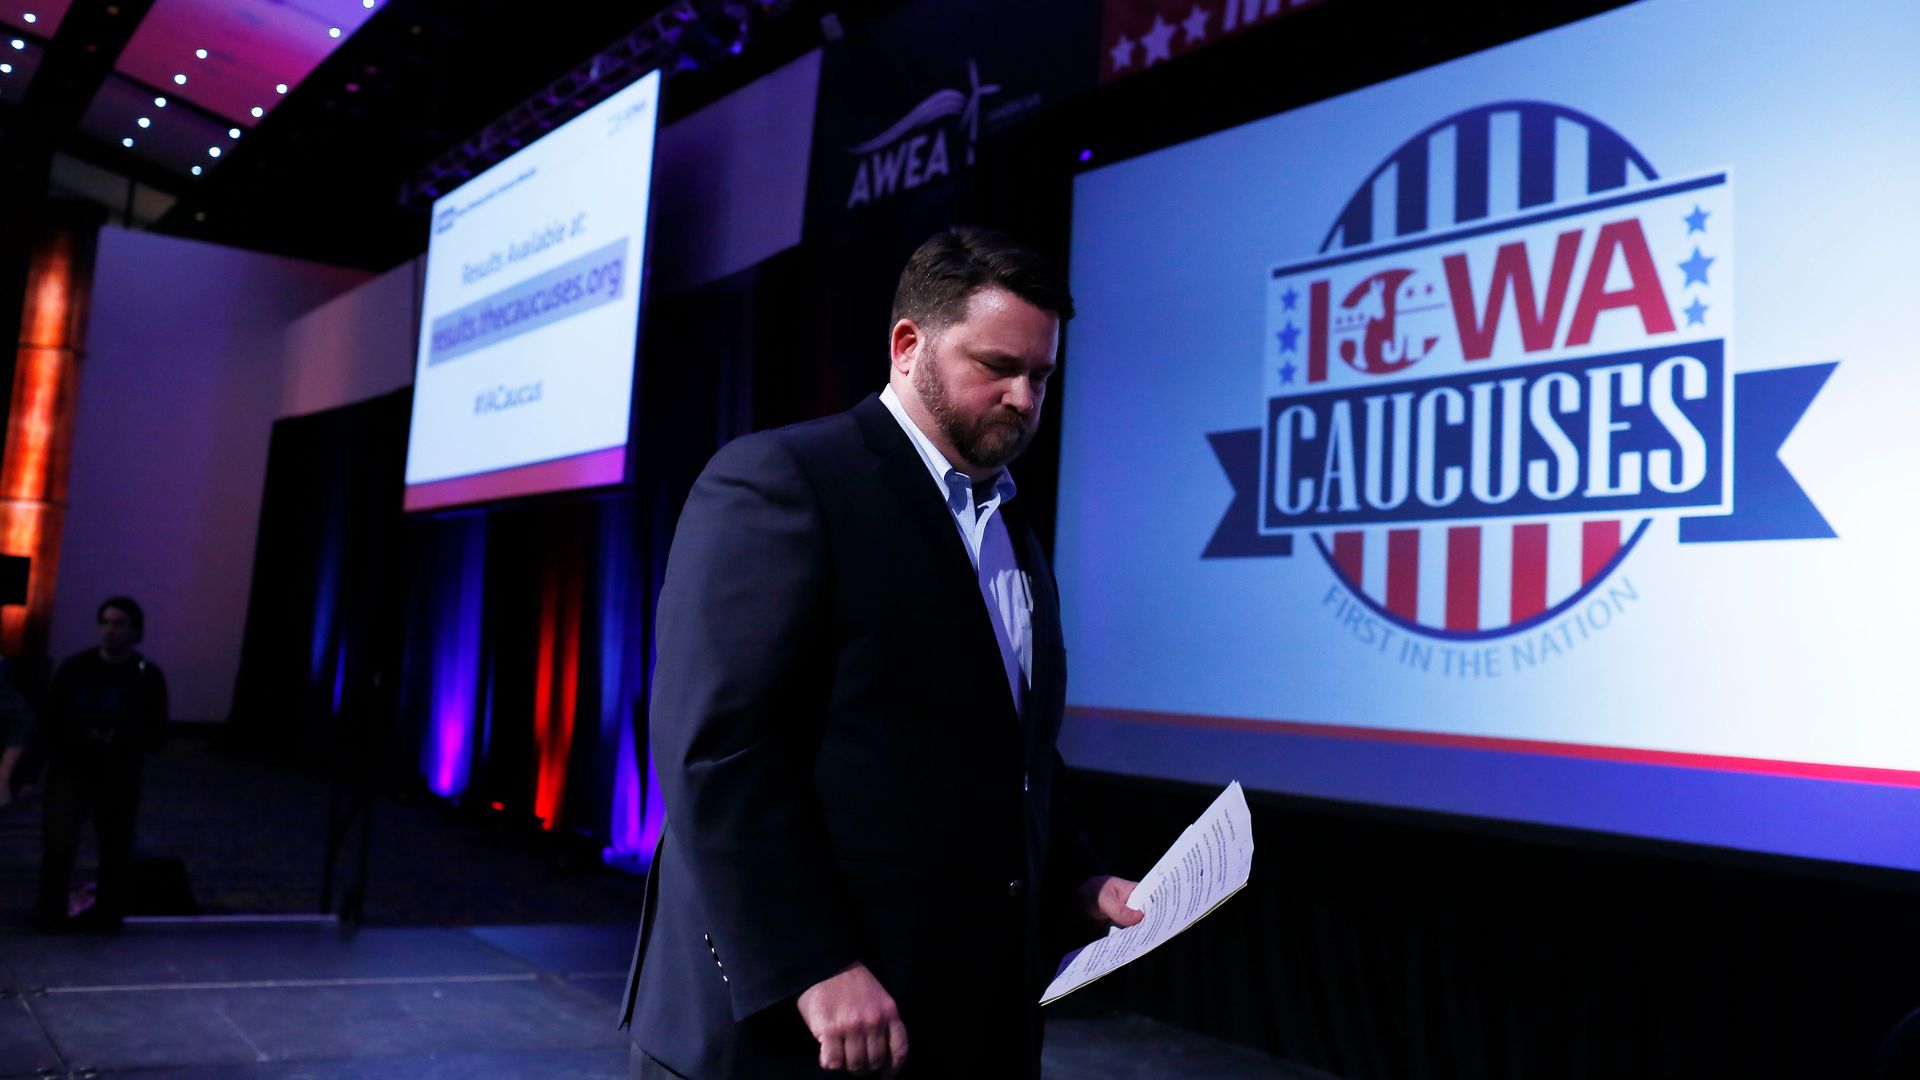 In this image, a man in a suit walks across a stage while holding paper. A screen behind him says "Iowa Caucuses" 